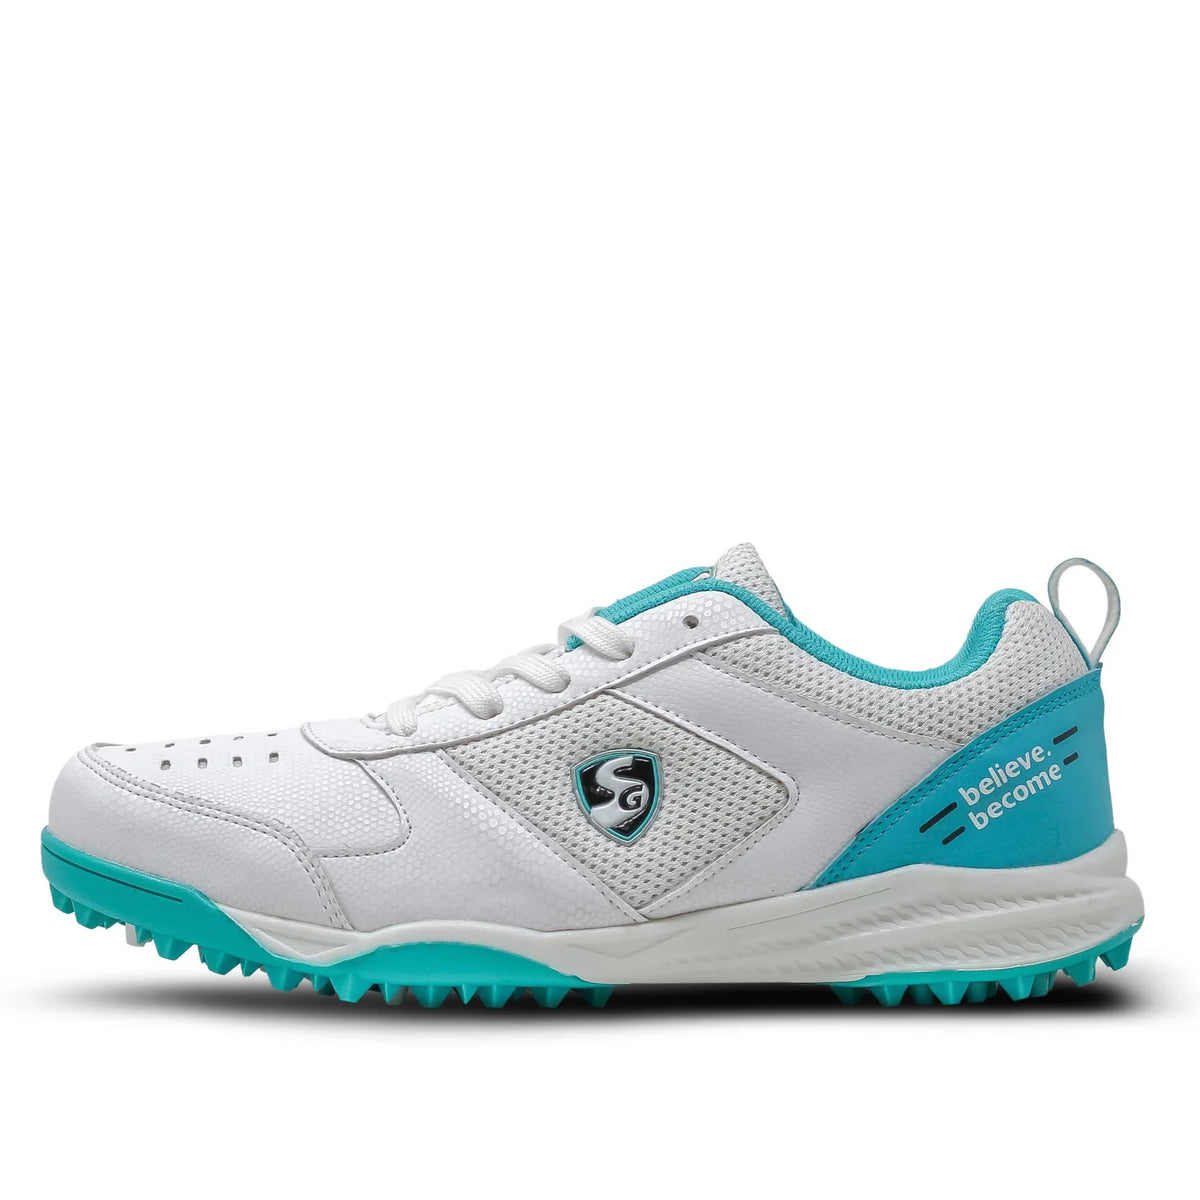 Pre-Order SG FUSION Lightweight and Durable Sports Shoes for Enhanced Performance - Teal/White